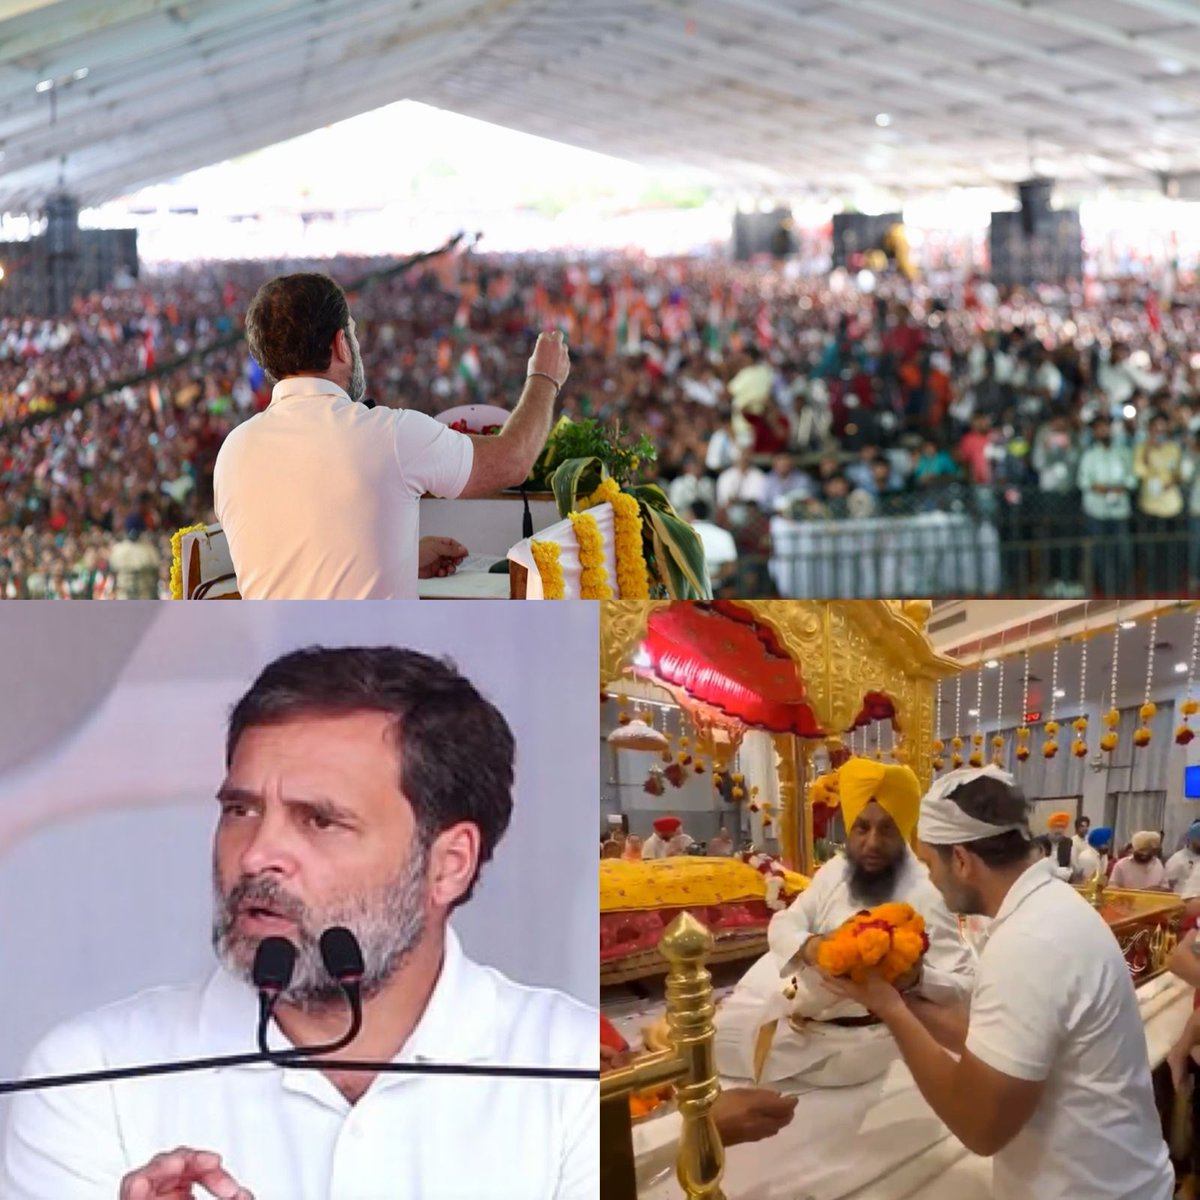 Rahul Gandhi went to Chhattisgarh, addressed massive rally in Bastar. Then went to Maharashtra and addressed massive rally in Bhandara

He then left for Delhi, landed at 8.30 PM and went directly to Gurudwara without any rest. 

He’s working so hard but unlike Modi, he doesn’t…